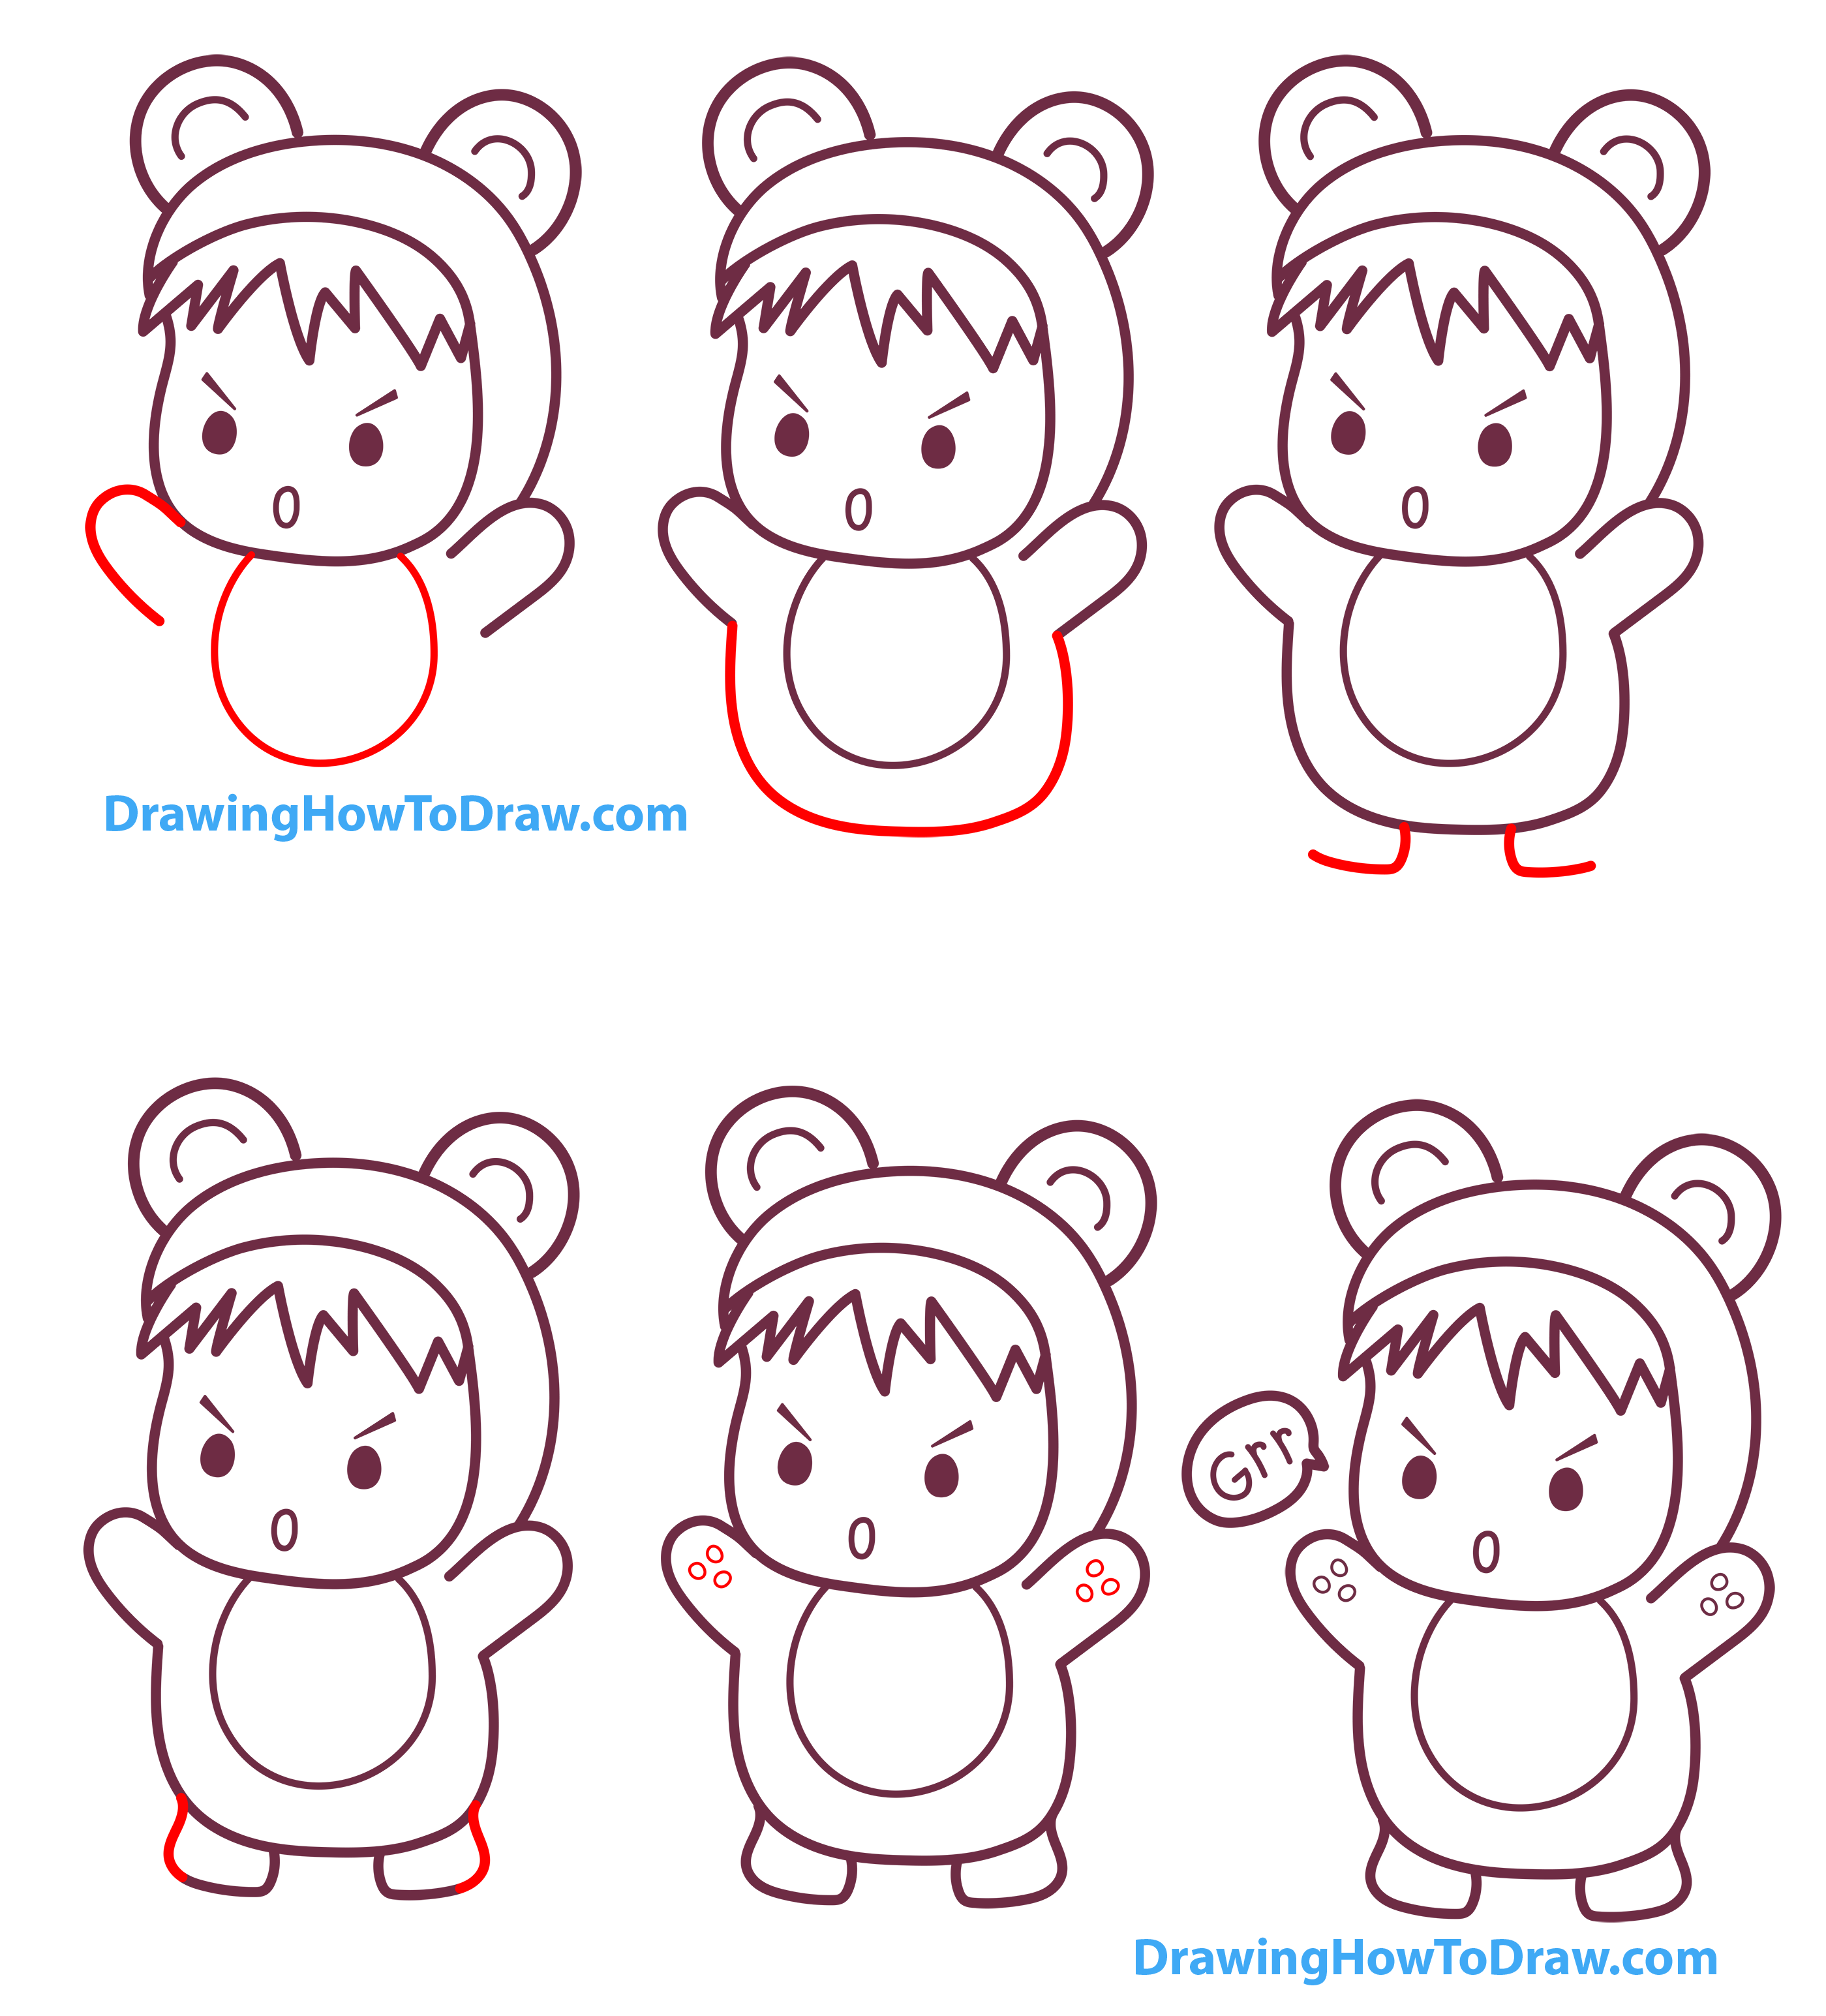 How to Draw a Kawaii / Chibi Boy or Girl in a Bear Onesie Costume - Easy Step-by-Step Drawing Tutorial for Kids